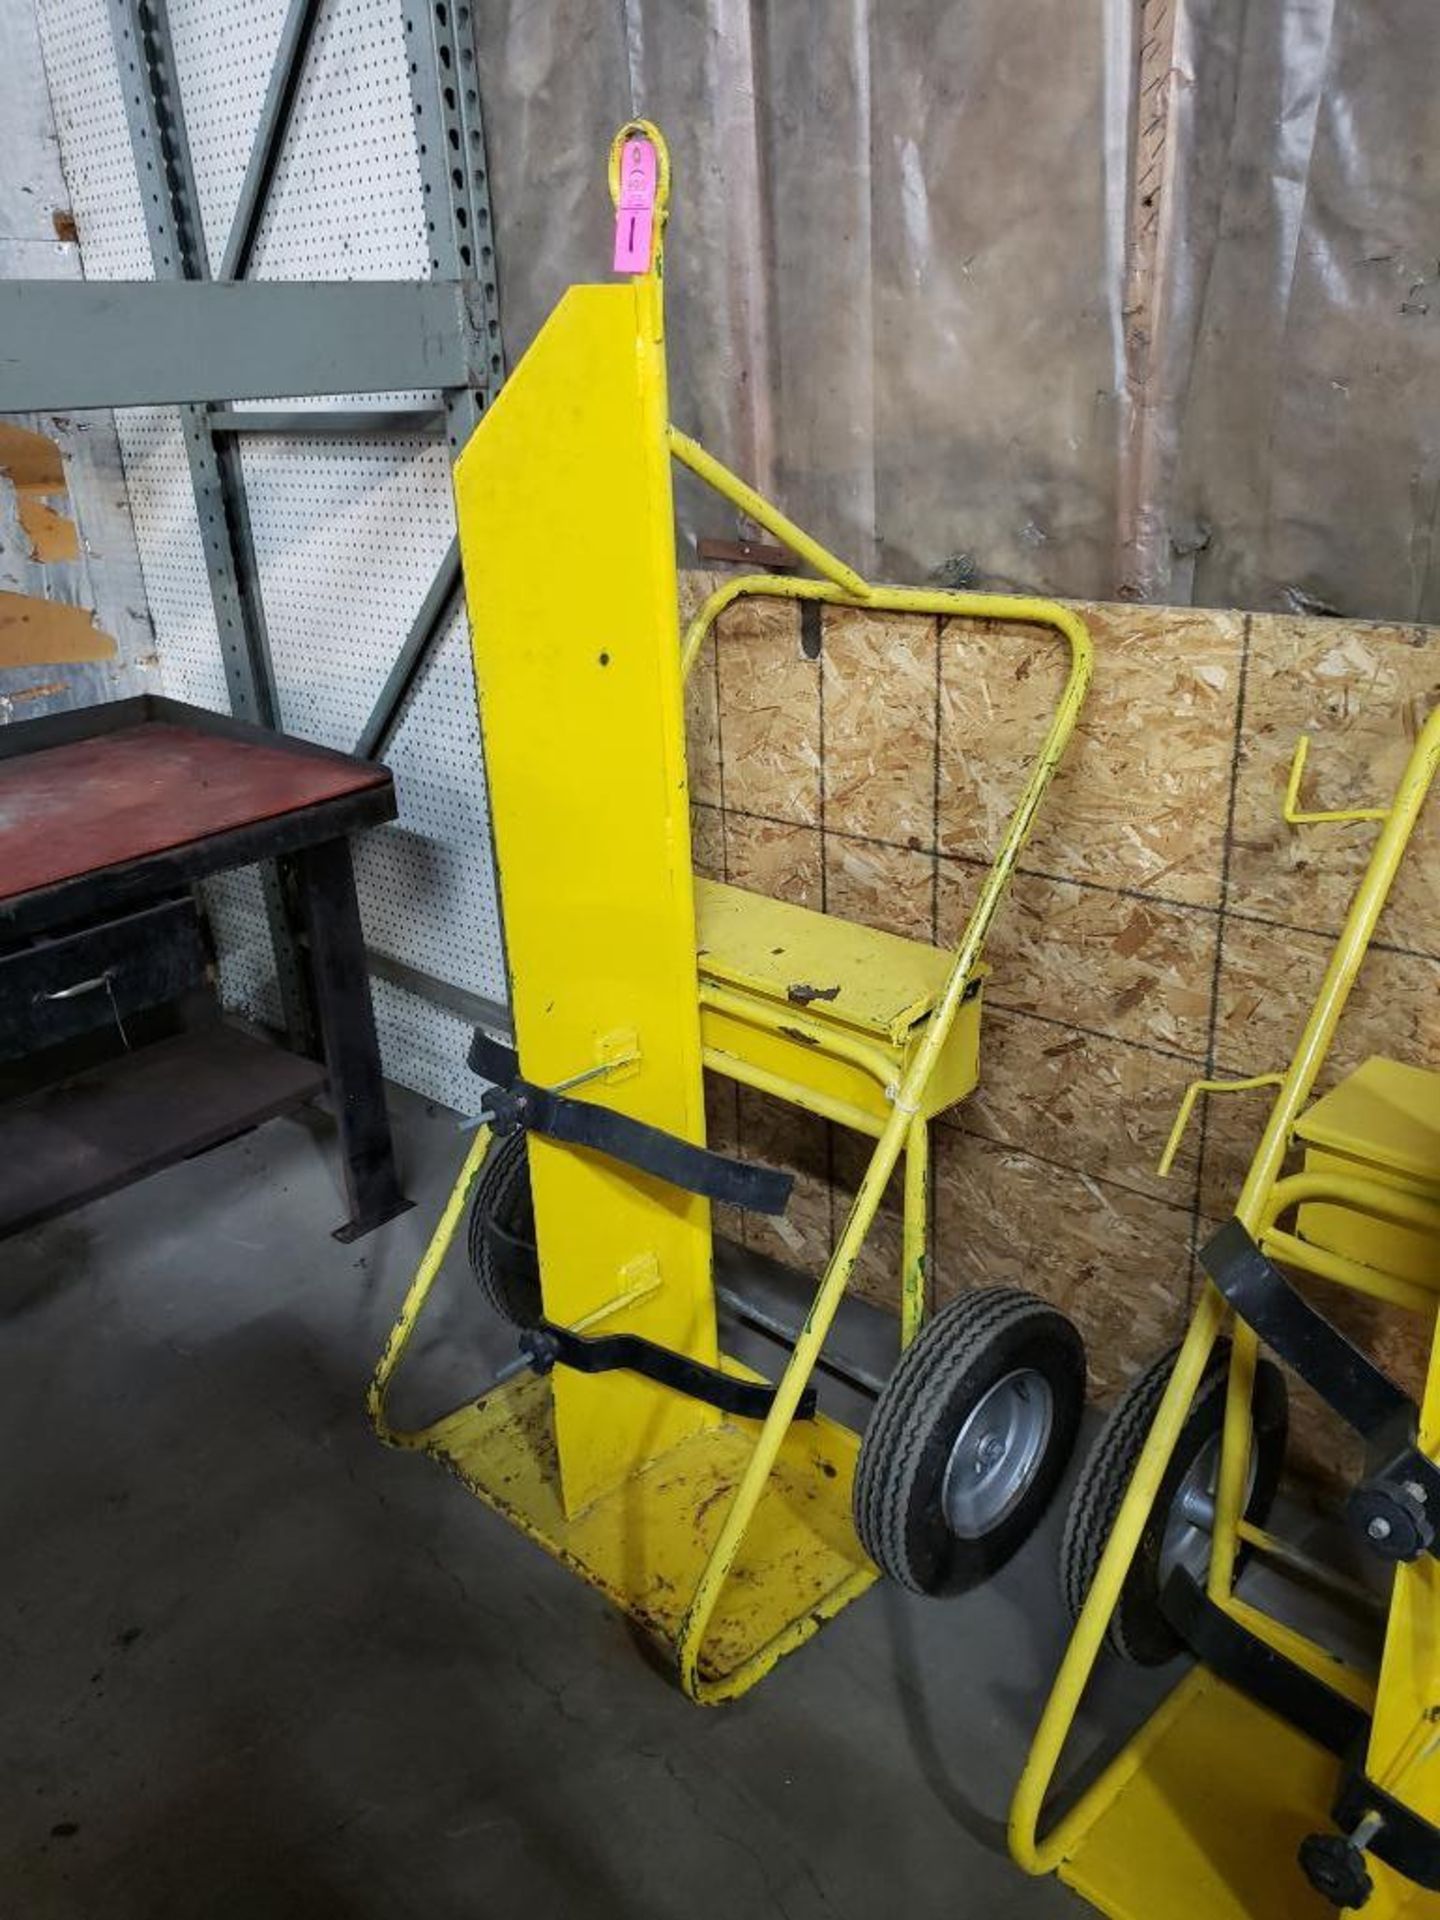 Heavy duty factory torch cart with pneumatic tires.